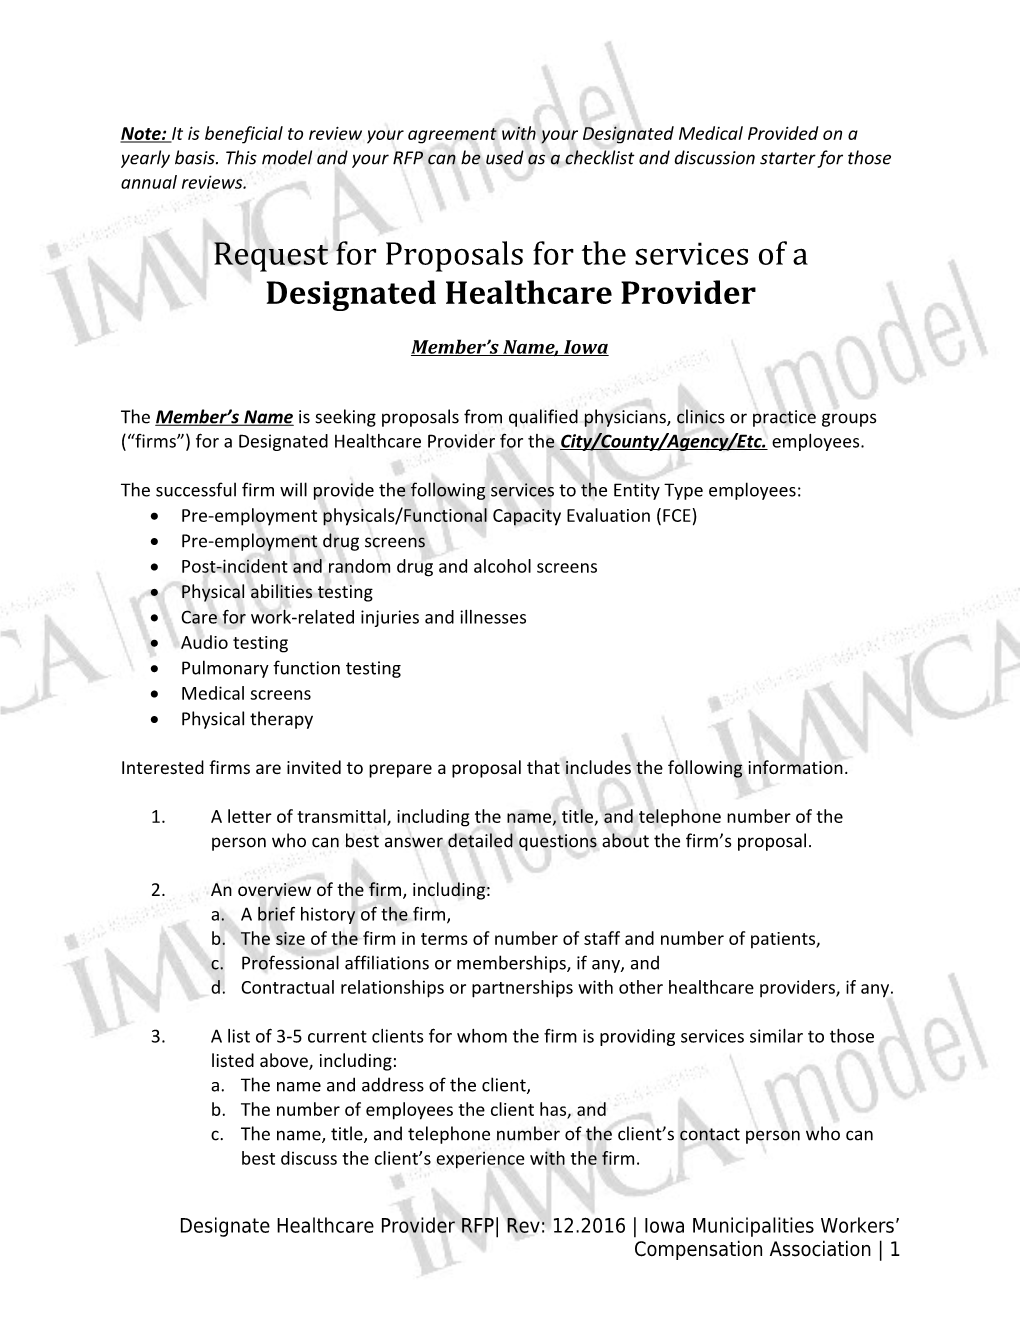 Request for Proposals for the Services of A